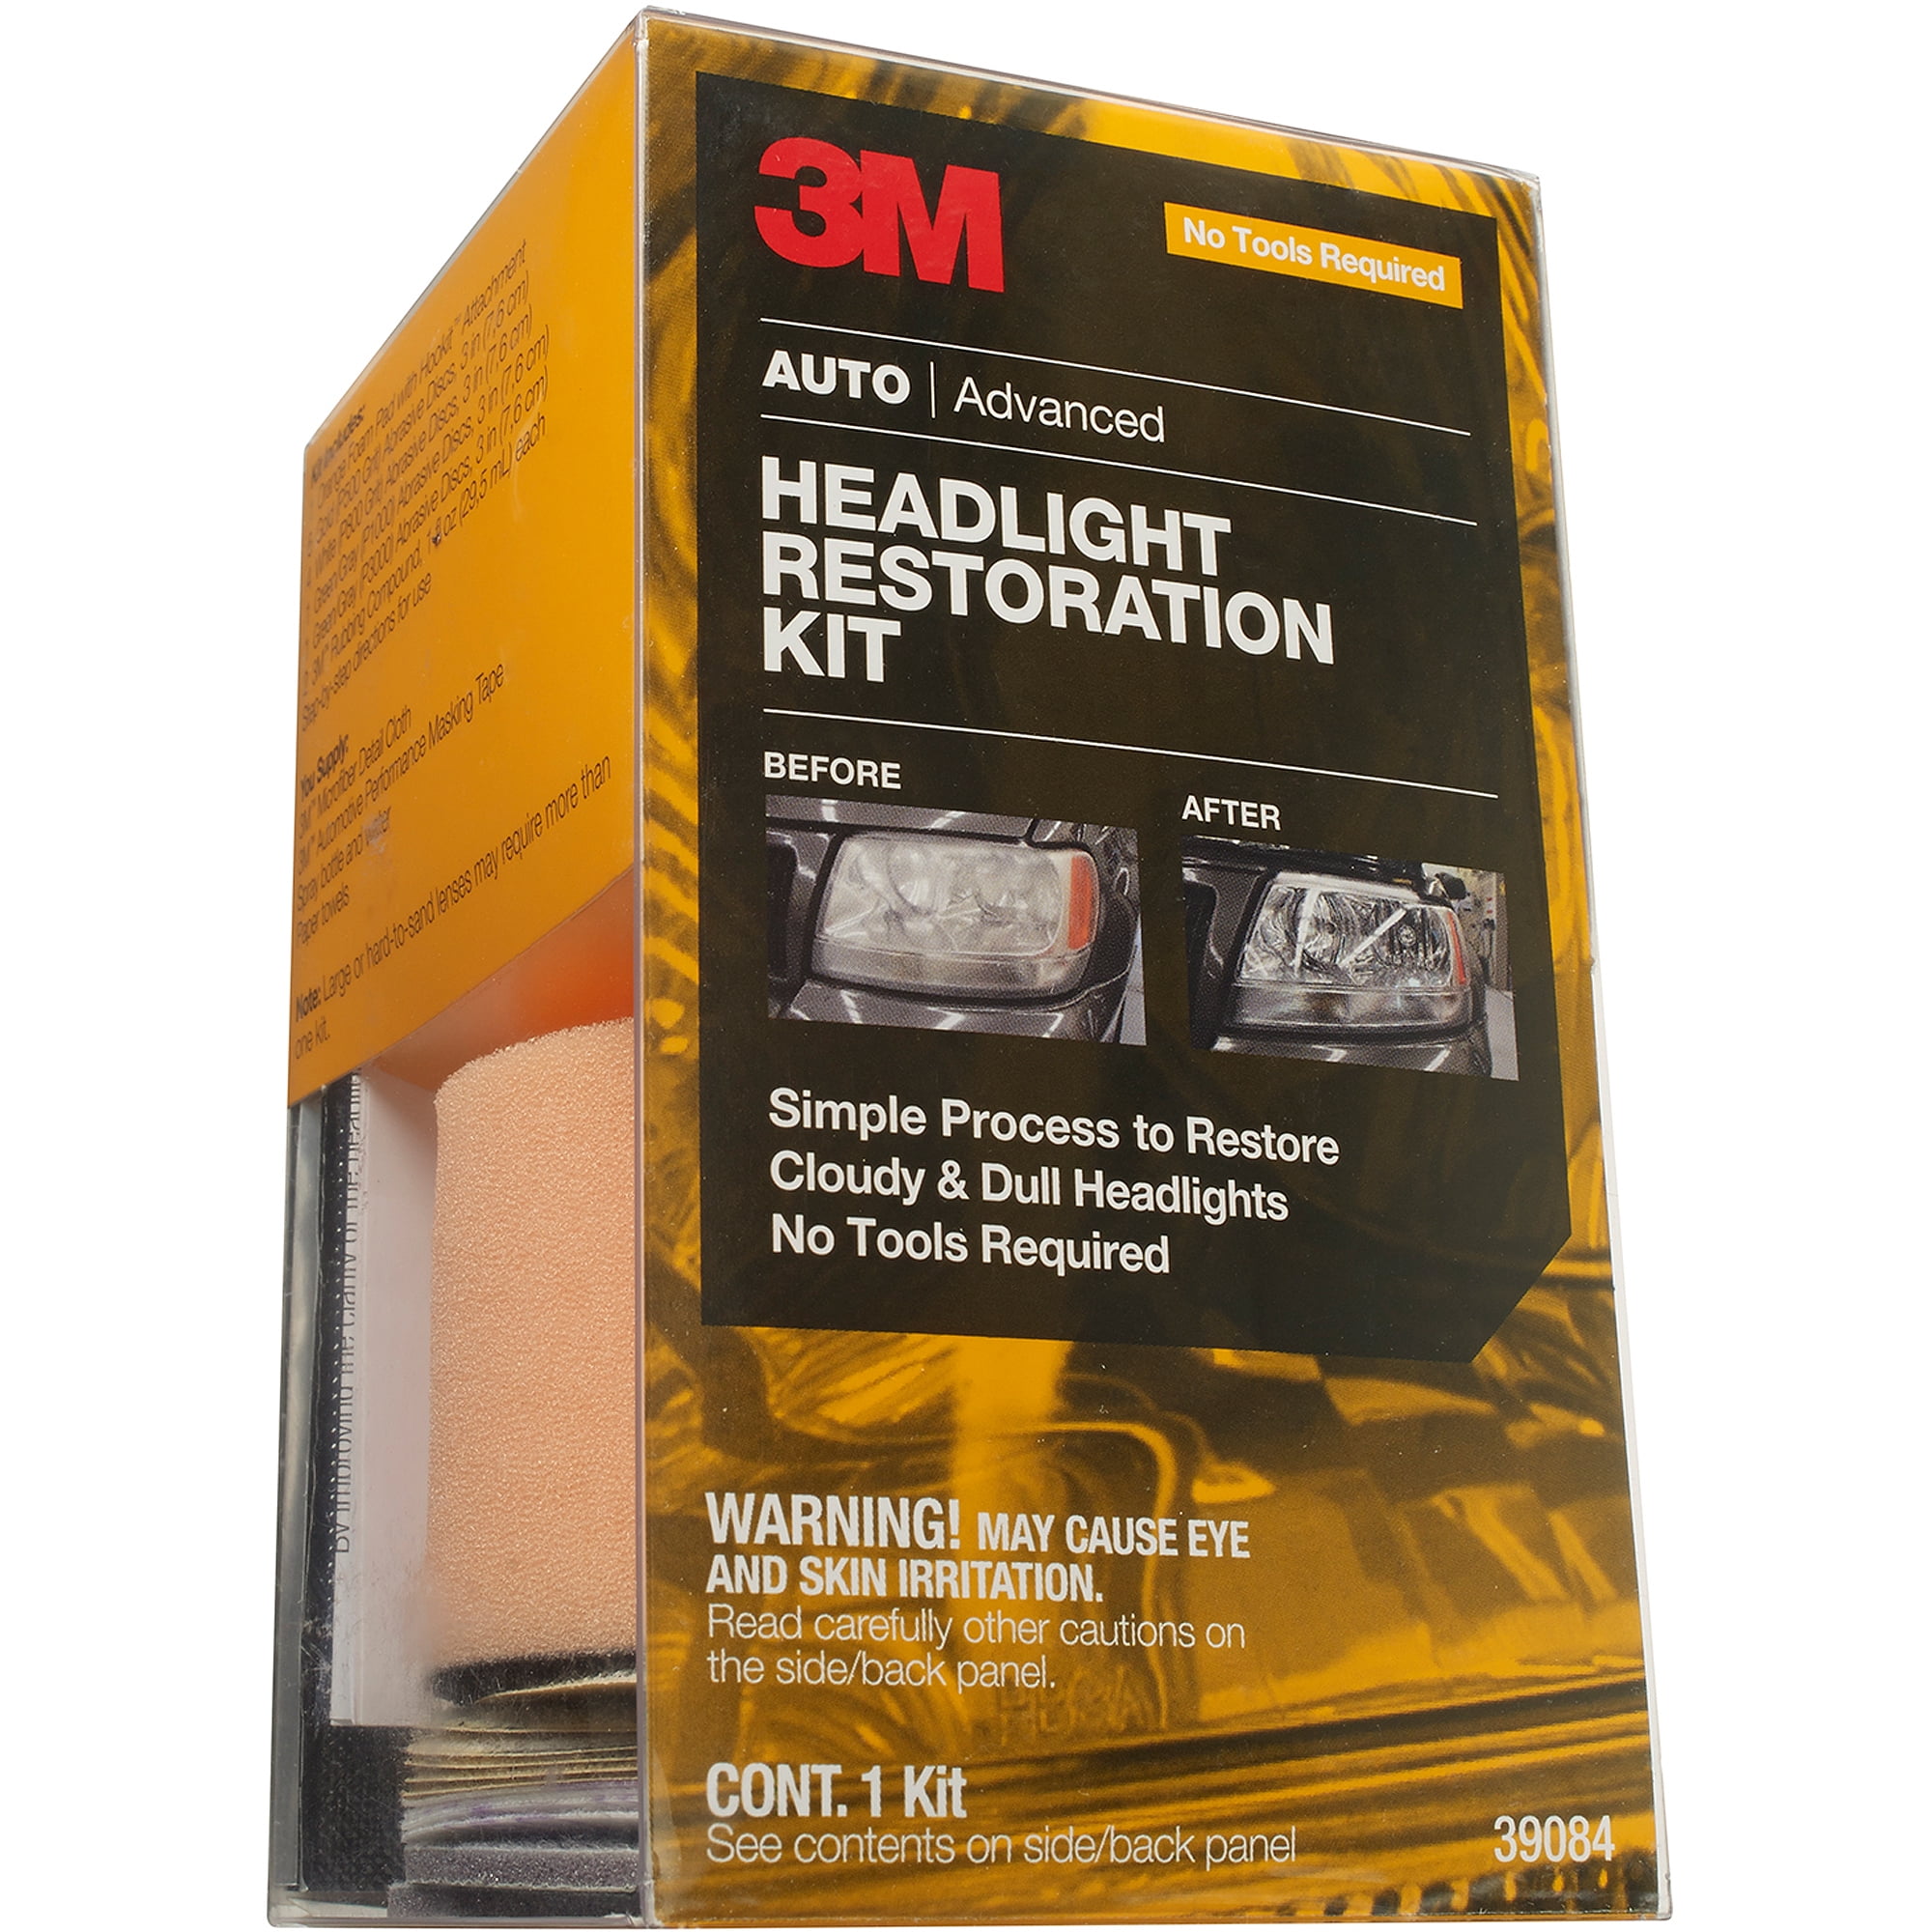 What are some uses for the 3M Headlight Lens Restoration System?